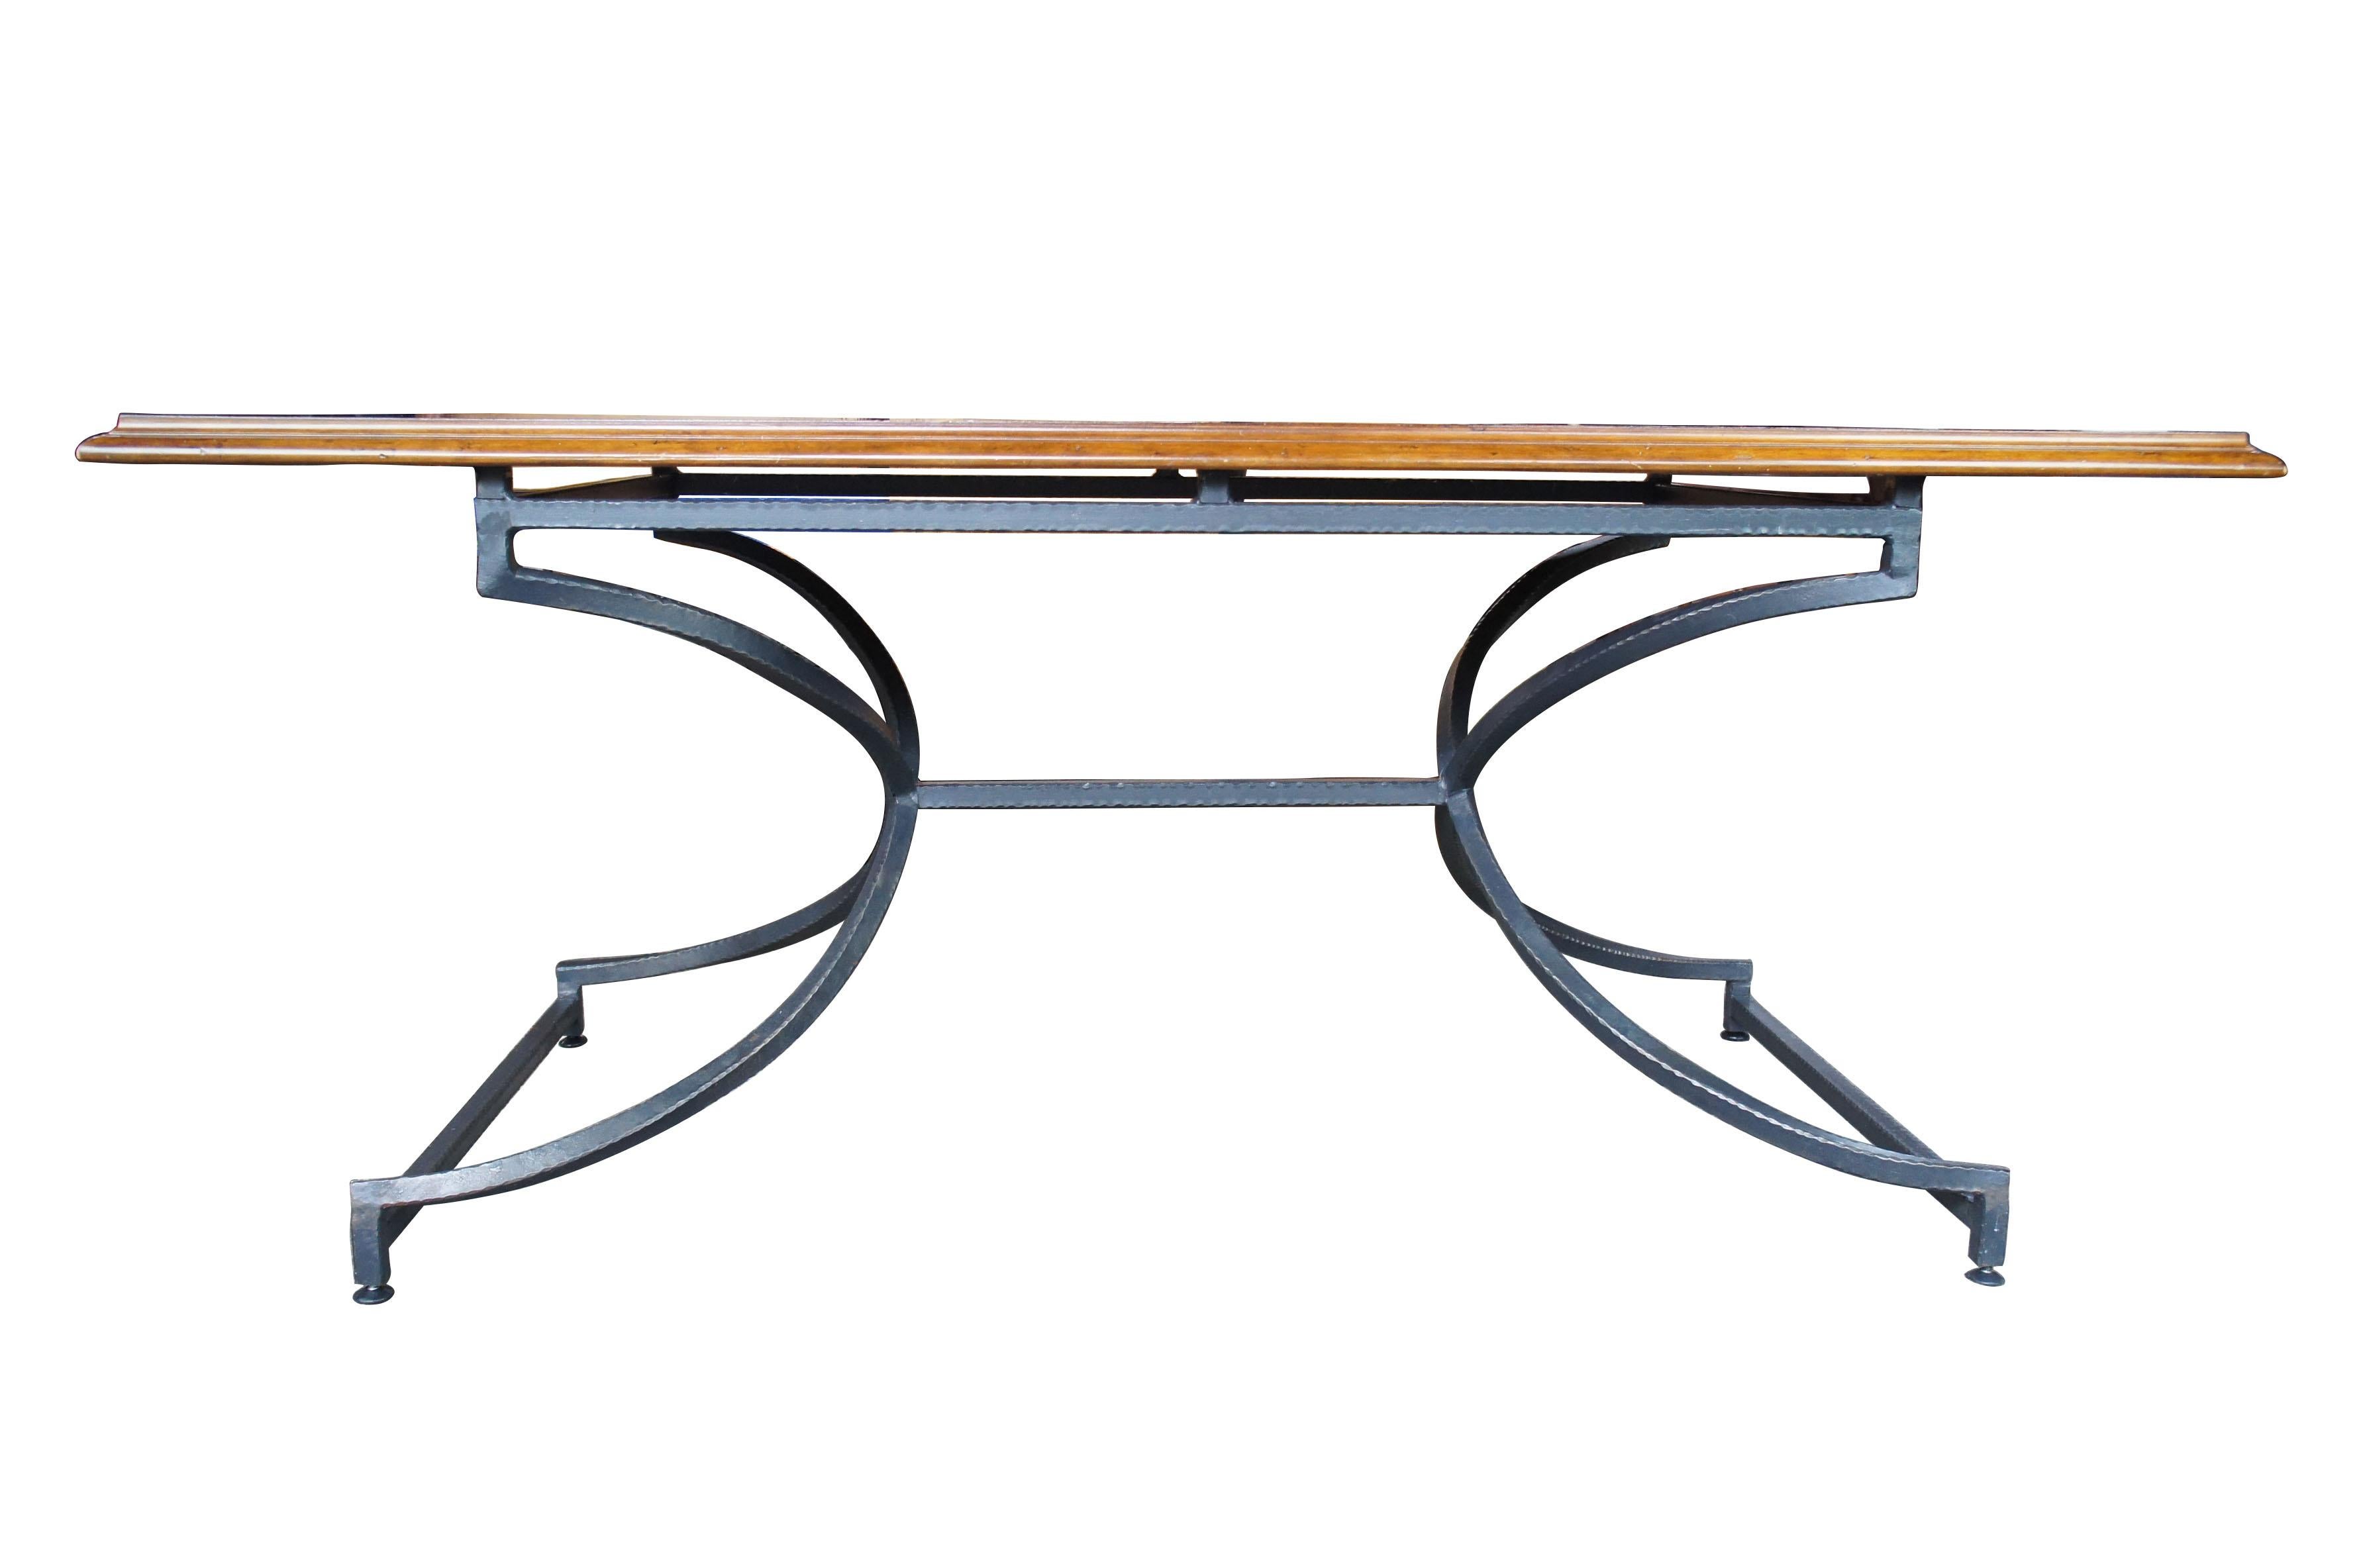 Century Furniture Giotto work table walnut finish iron base dining console hall

Century Giotto work table
Finish walnut, 58H-751
(As seen on page 3 of their catalog, see 2nd photo)

This table will capture your soul with its stunning